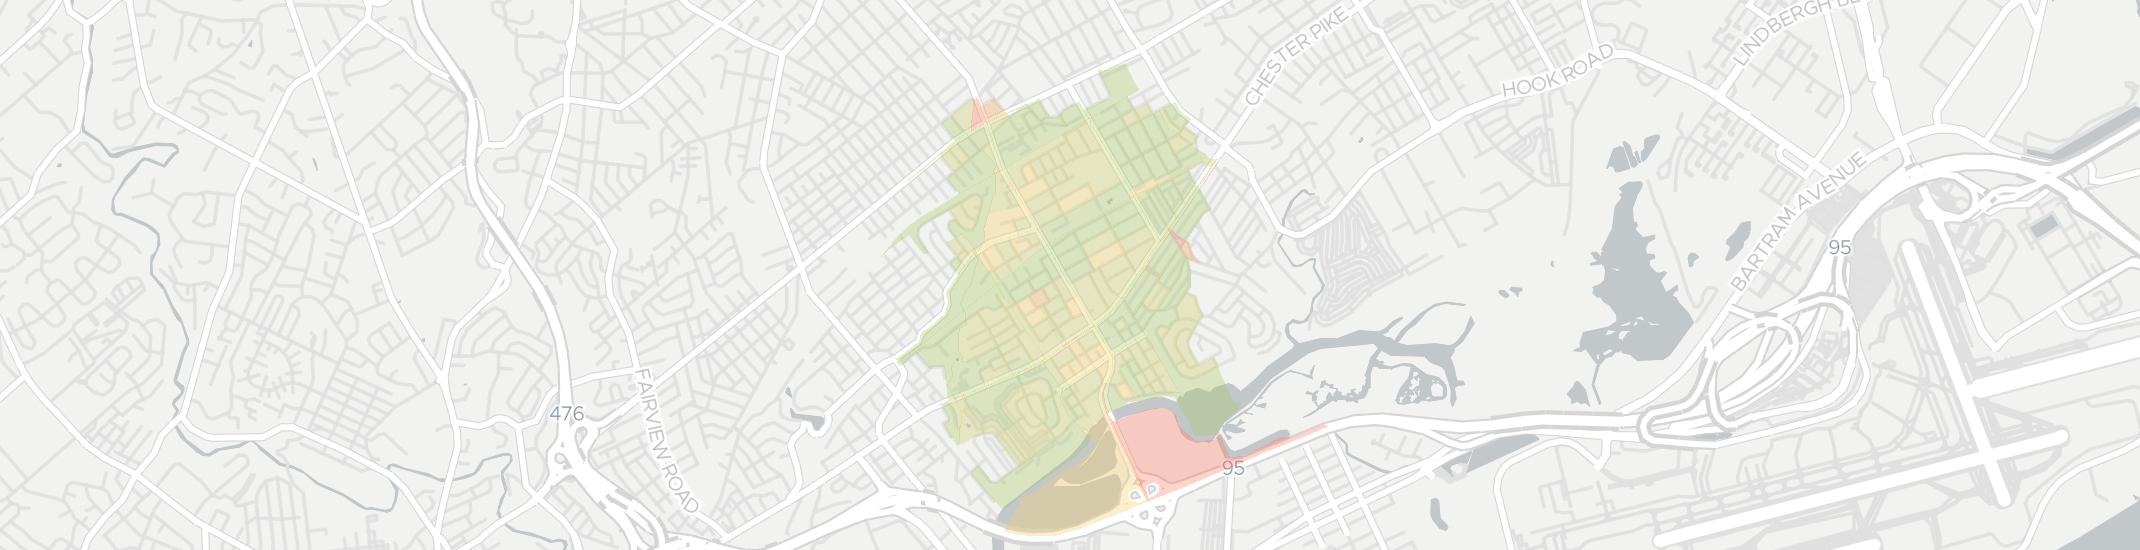 Prospect Park Internet Competition Map. Click for interactive map.